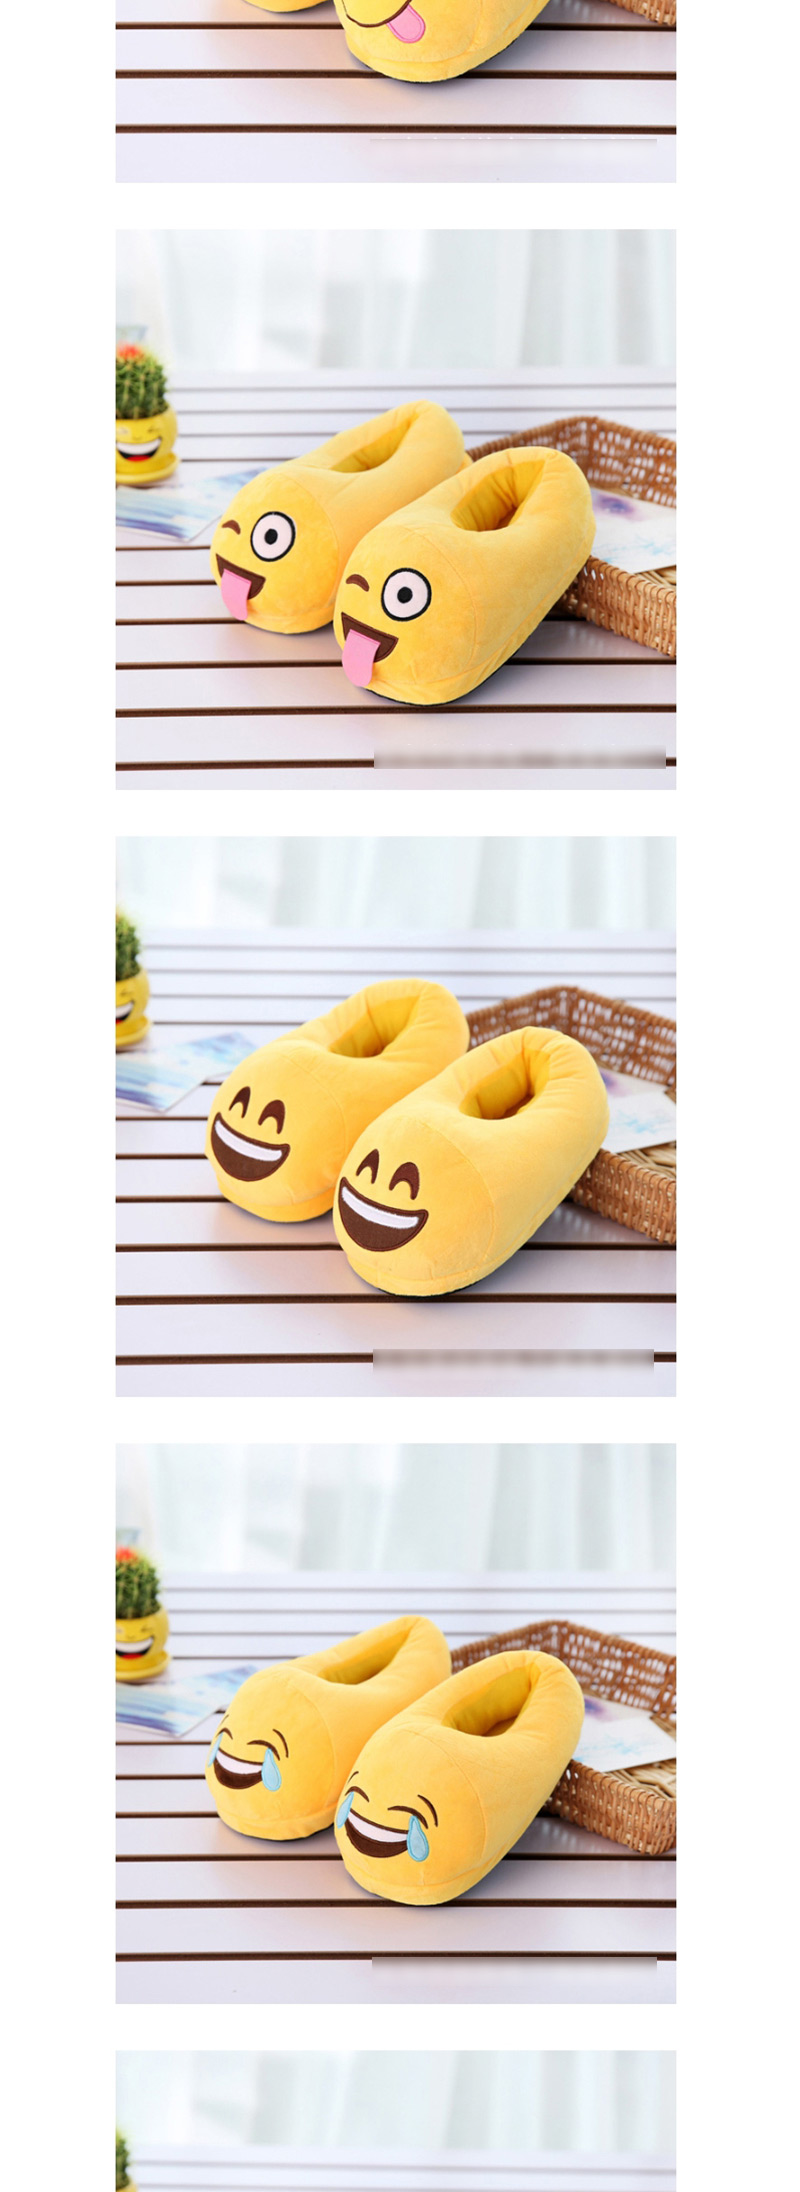 Fashion 17 Yellow Cartoon Expression Plush Bag With Cotton Slippers,Slippers